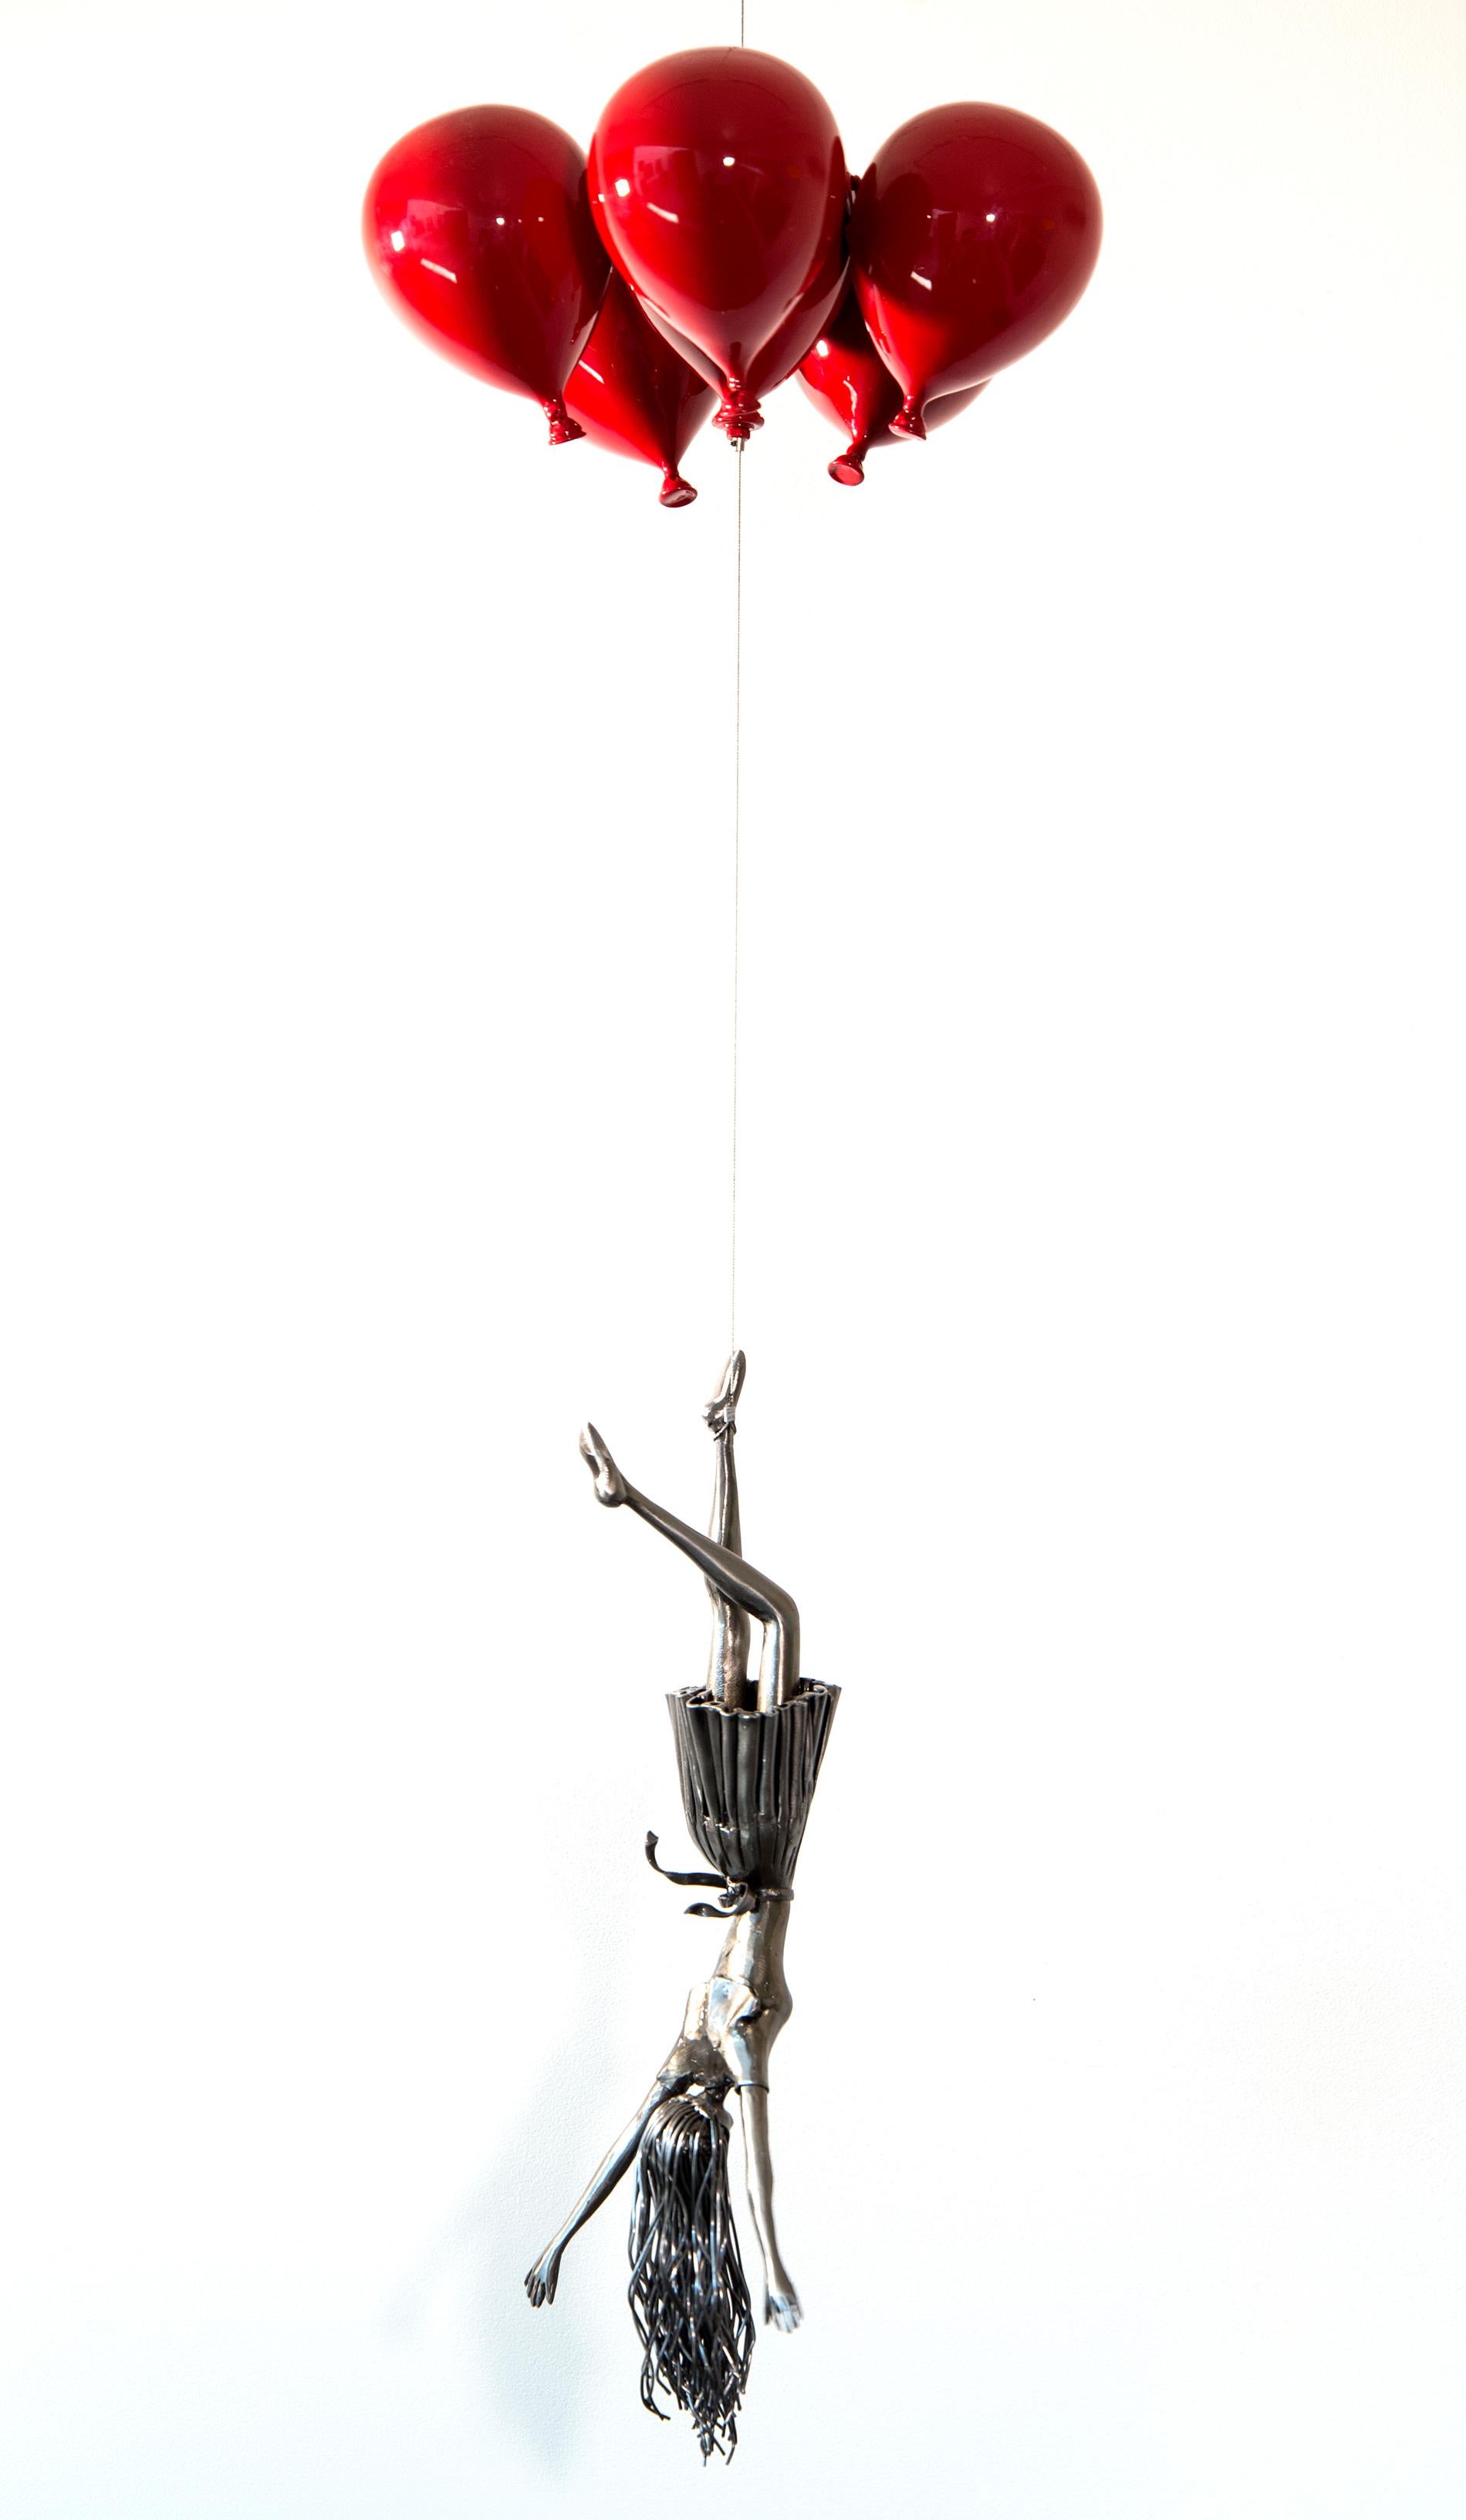 In this piece, Derya Ozparlak’s stunning steel figure of a woman hangs upside down, her long hair trailing behind her as she’s carried away by a bouquet of shiny red balloons. 
Ozparlak’s metal sculptures are intended as a metaphor for the angst of